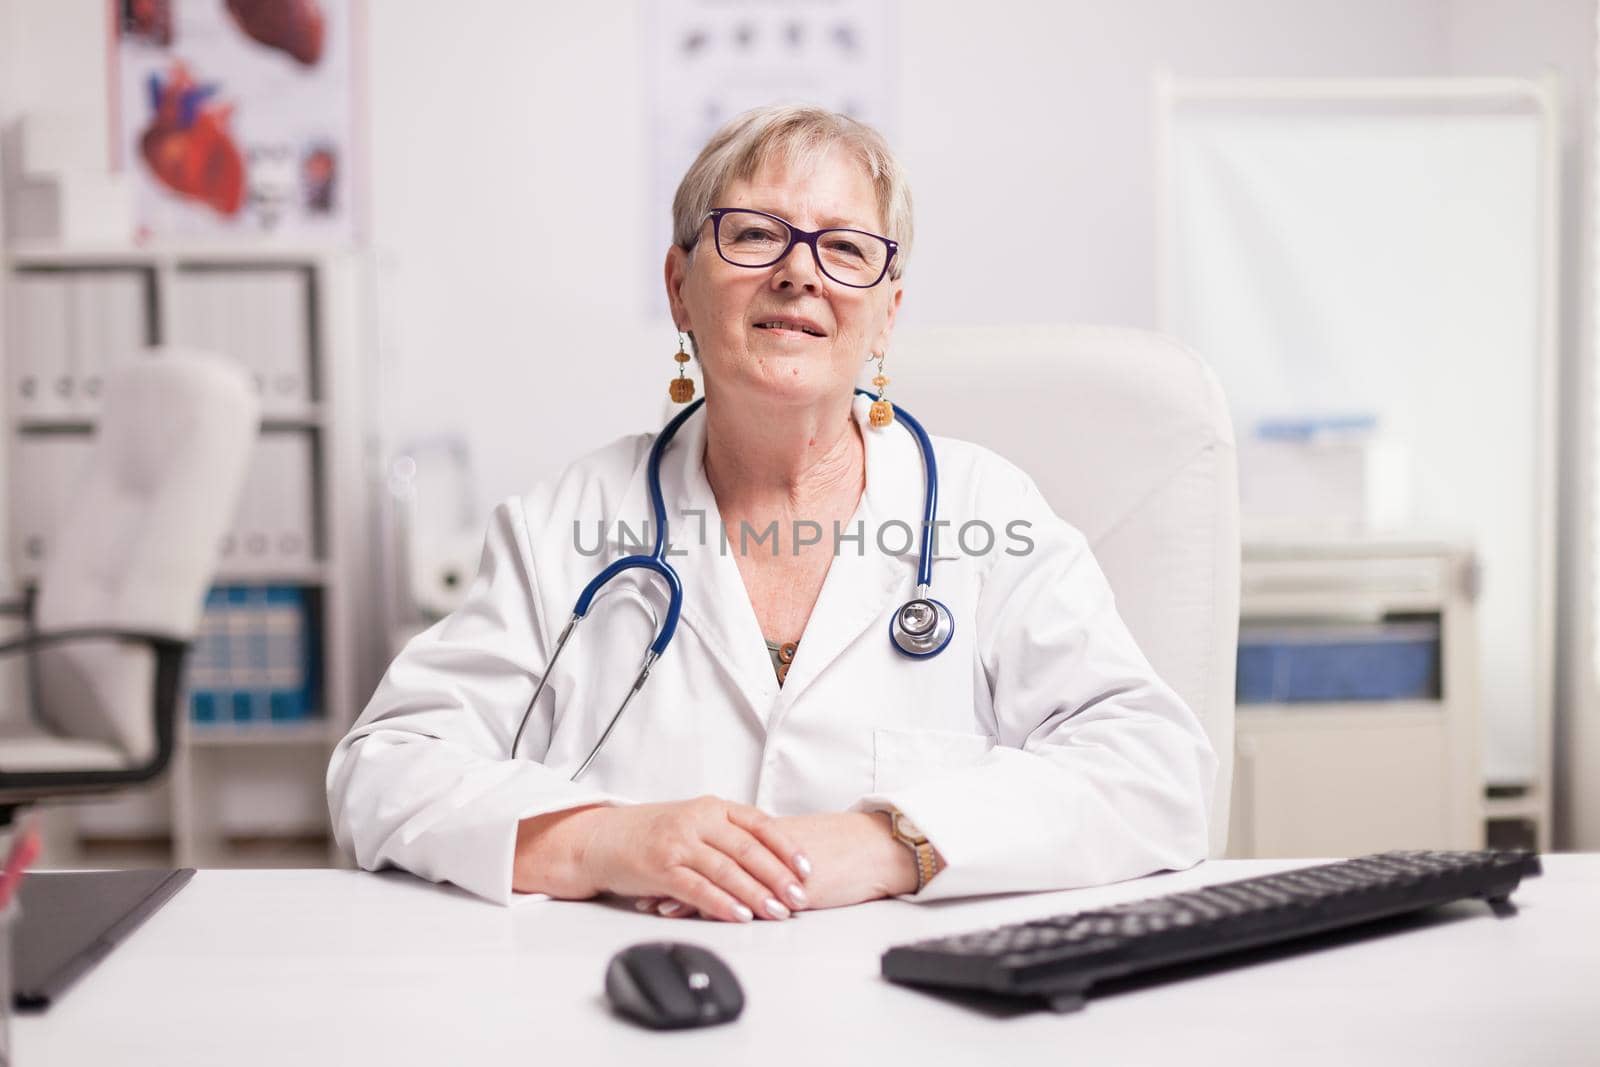 Senior doctor with stethoscope wearing white coat smiling to camera in hospital cabinet.